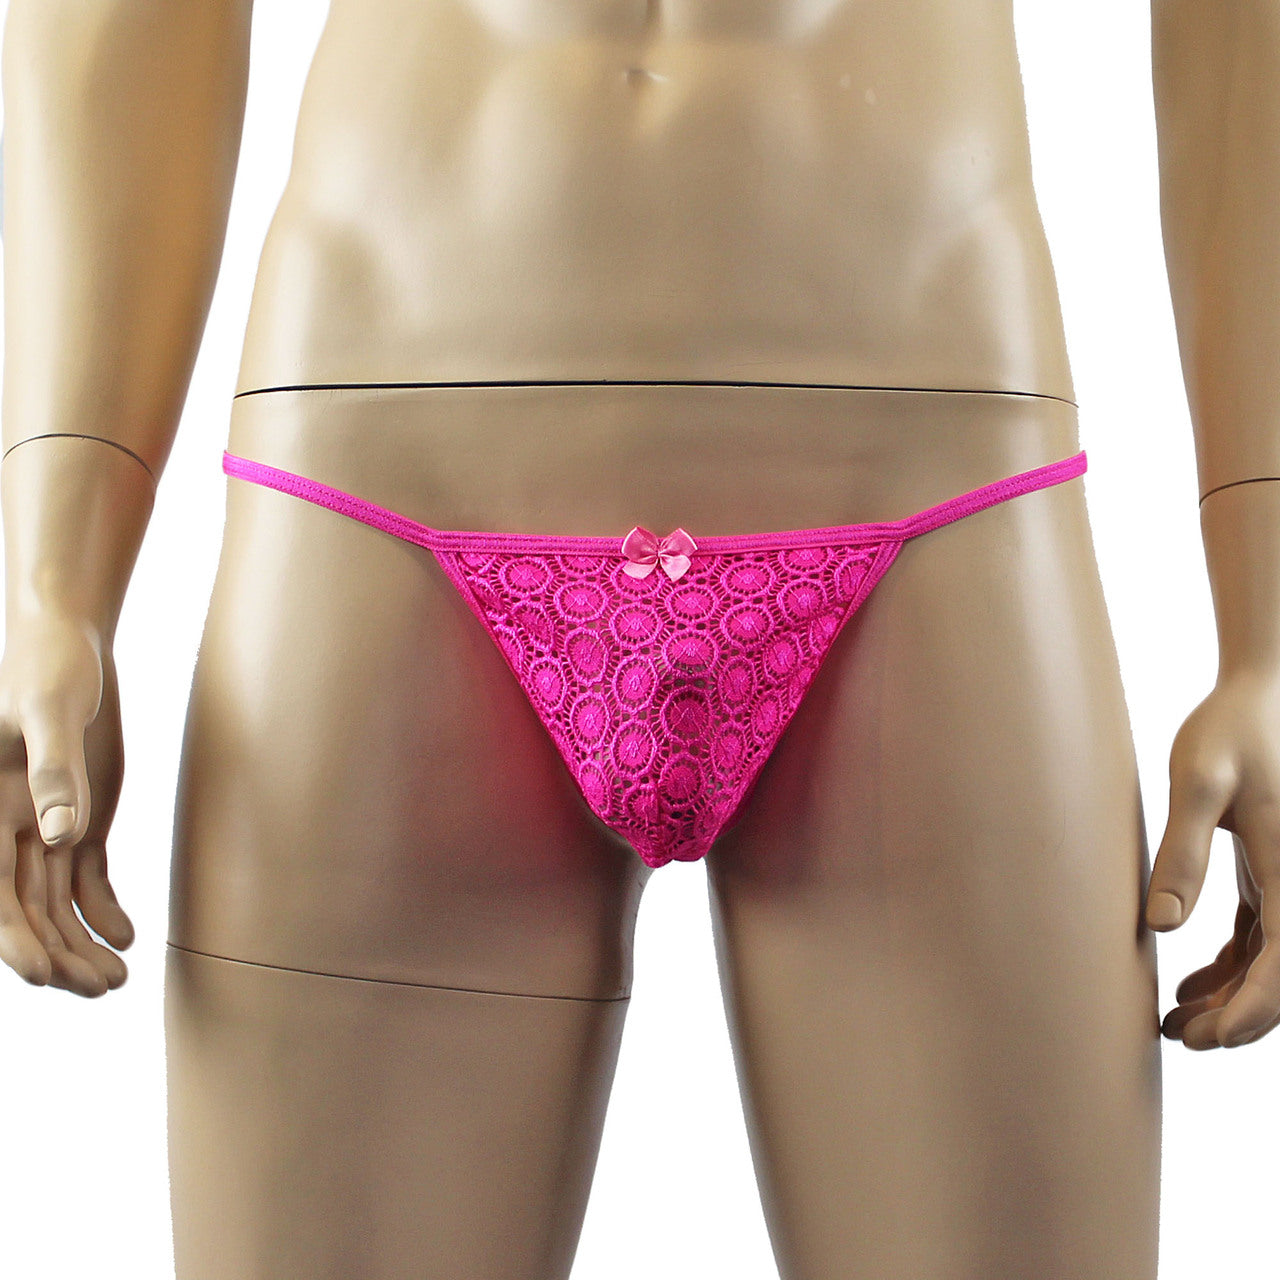 Mens Tease Circle Lace Pouch G string with Cute Bow Front Hot Pink